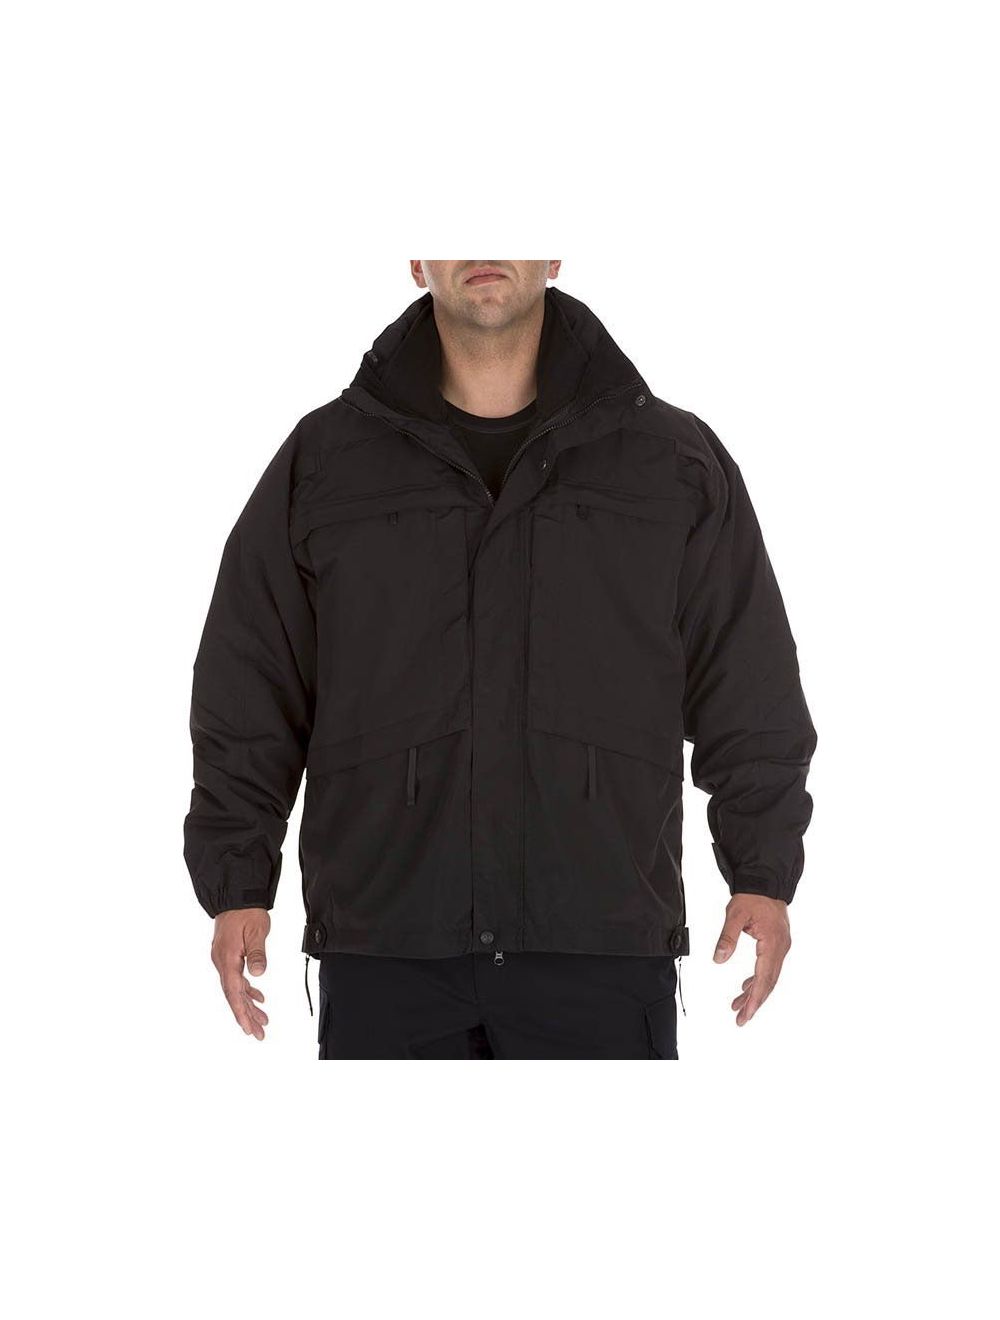 3-In-1 Jacket By 5.11 Tactical XS-2XL / Dark Navy